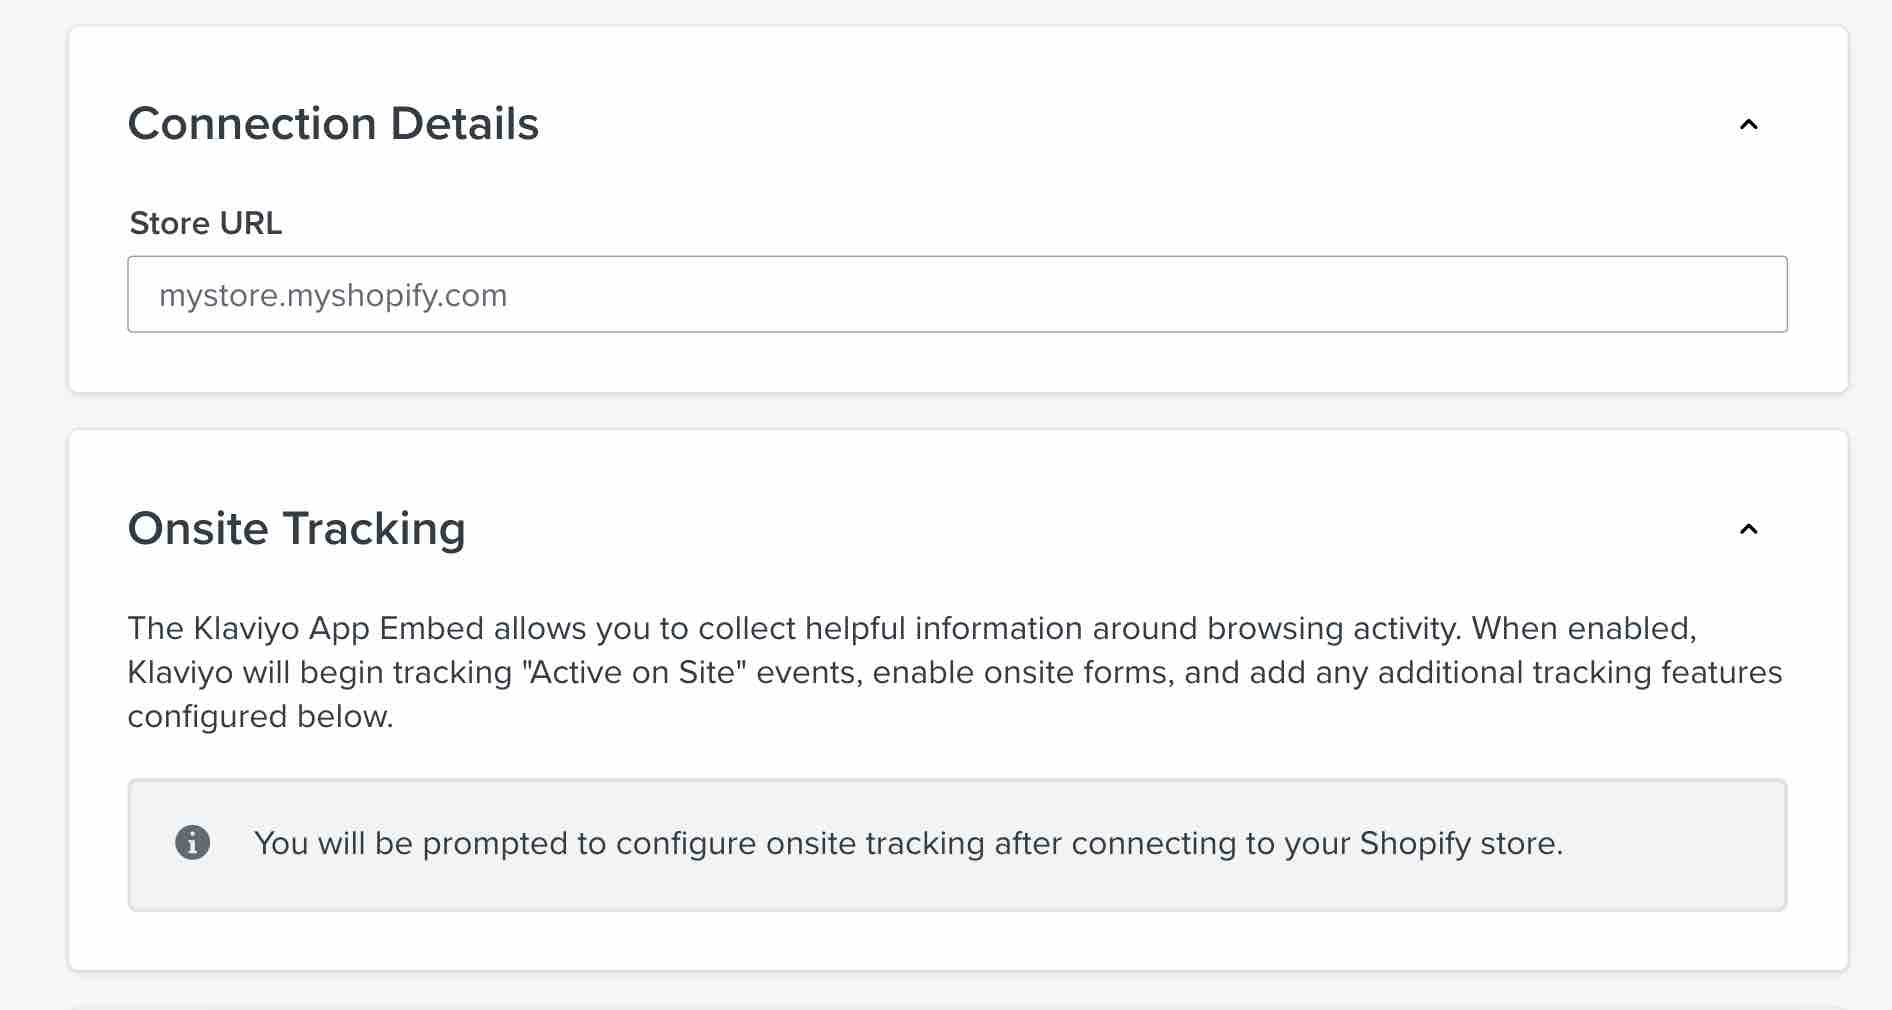 Shopify integration settings page in Klaviyo showing connection details including Store URL and Onsite tracking